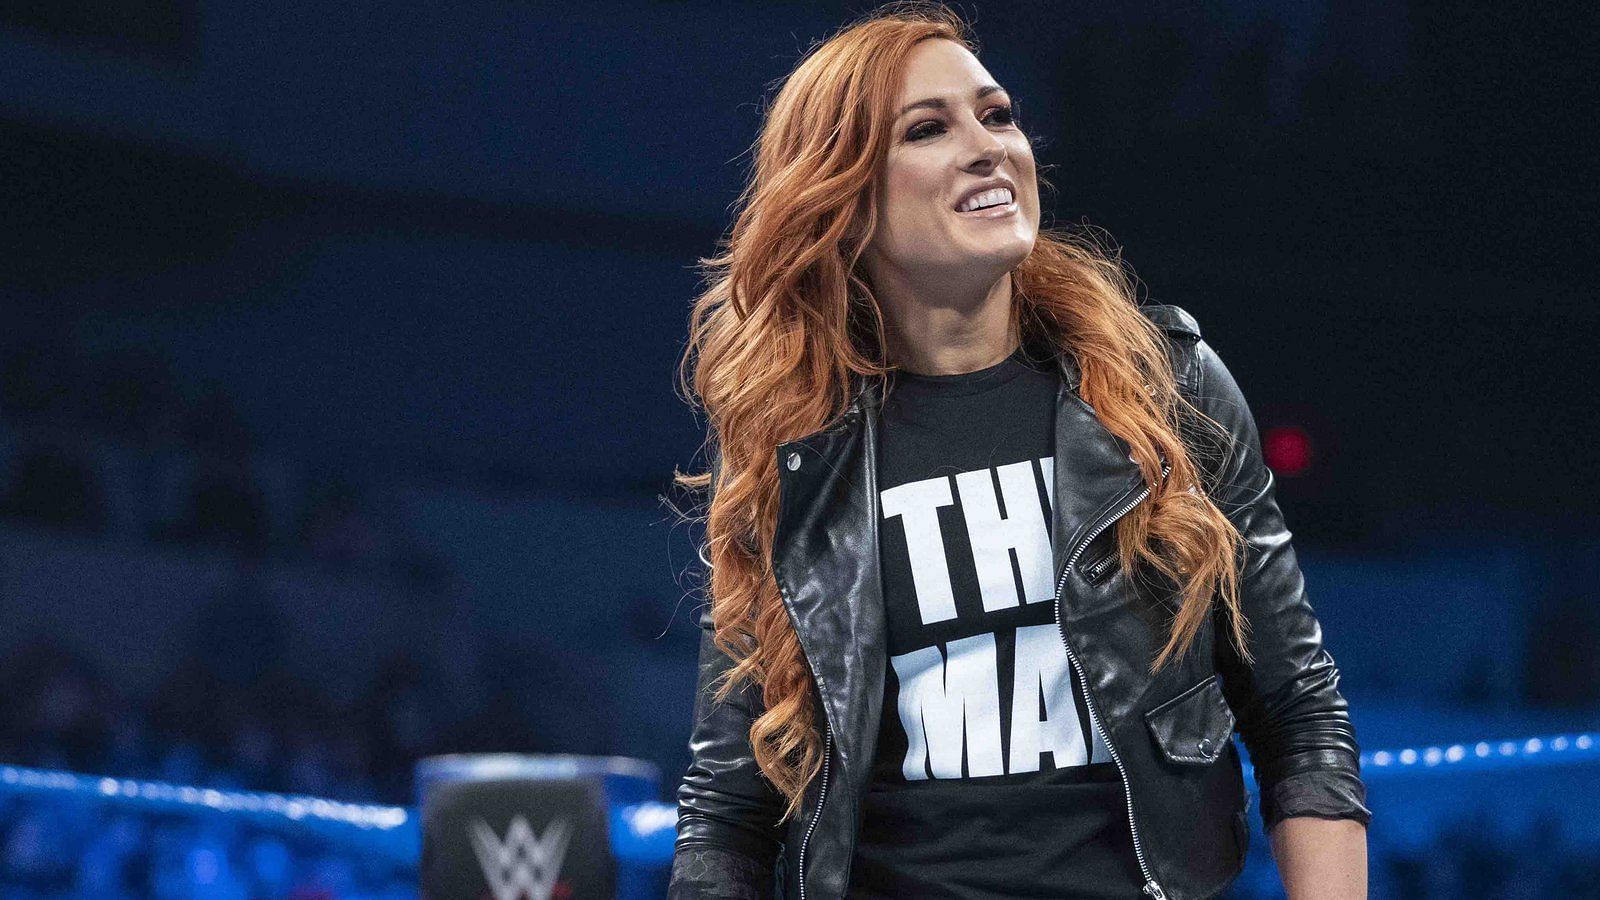 Becky Lynch will be off television for some time due to injury